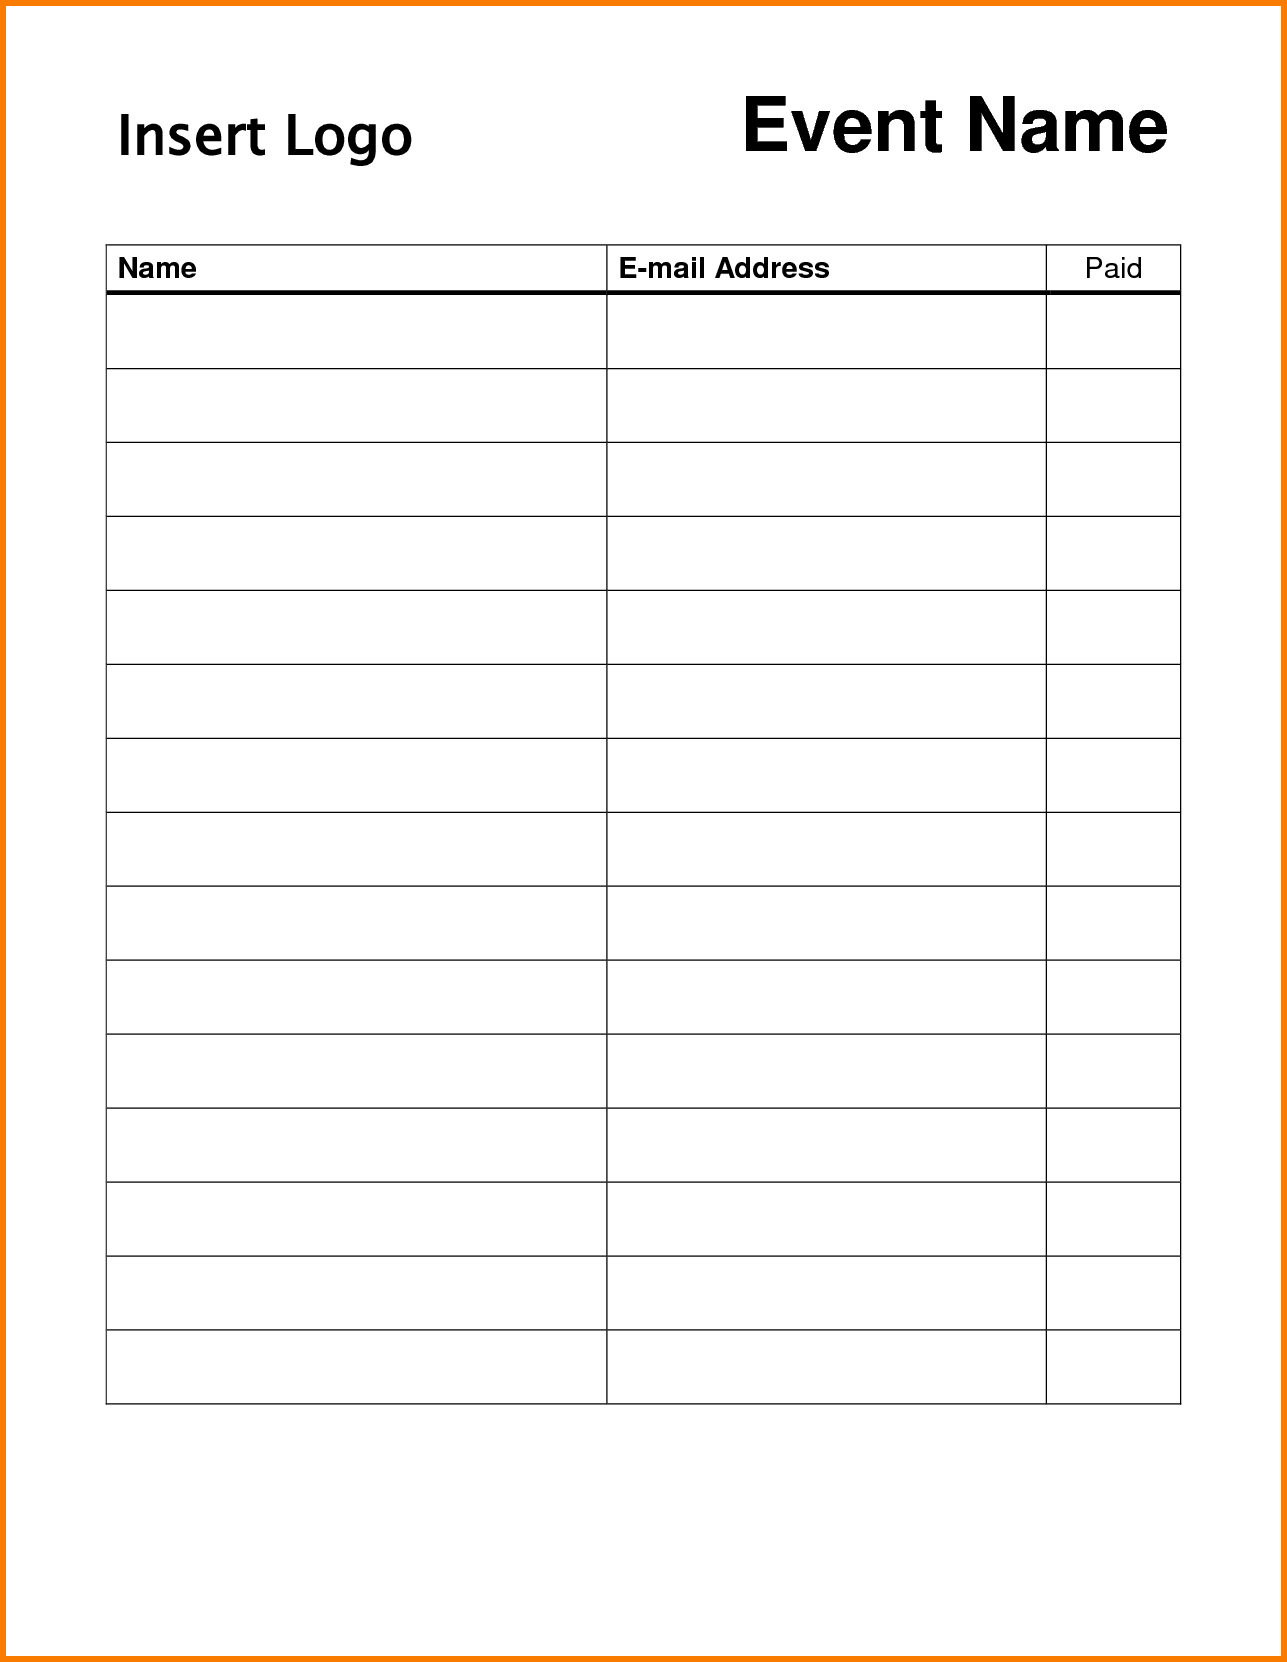 sign up sheet pdf   Ecza.solinf.co